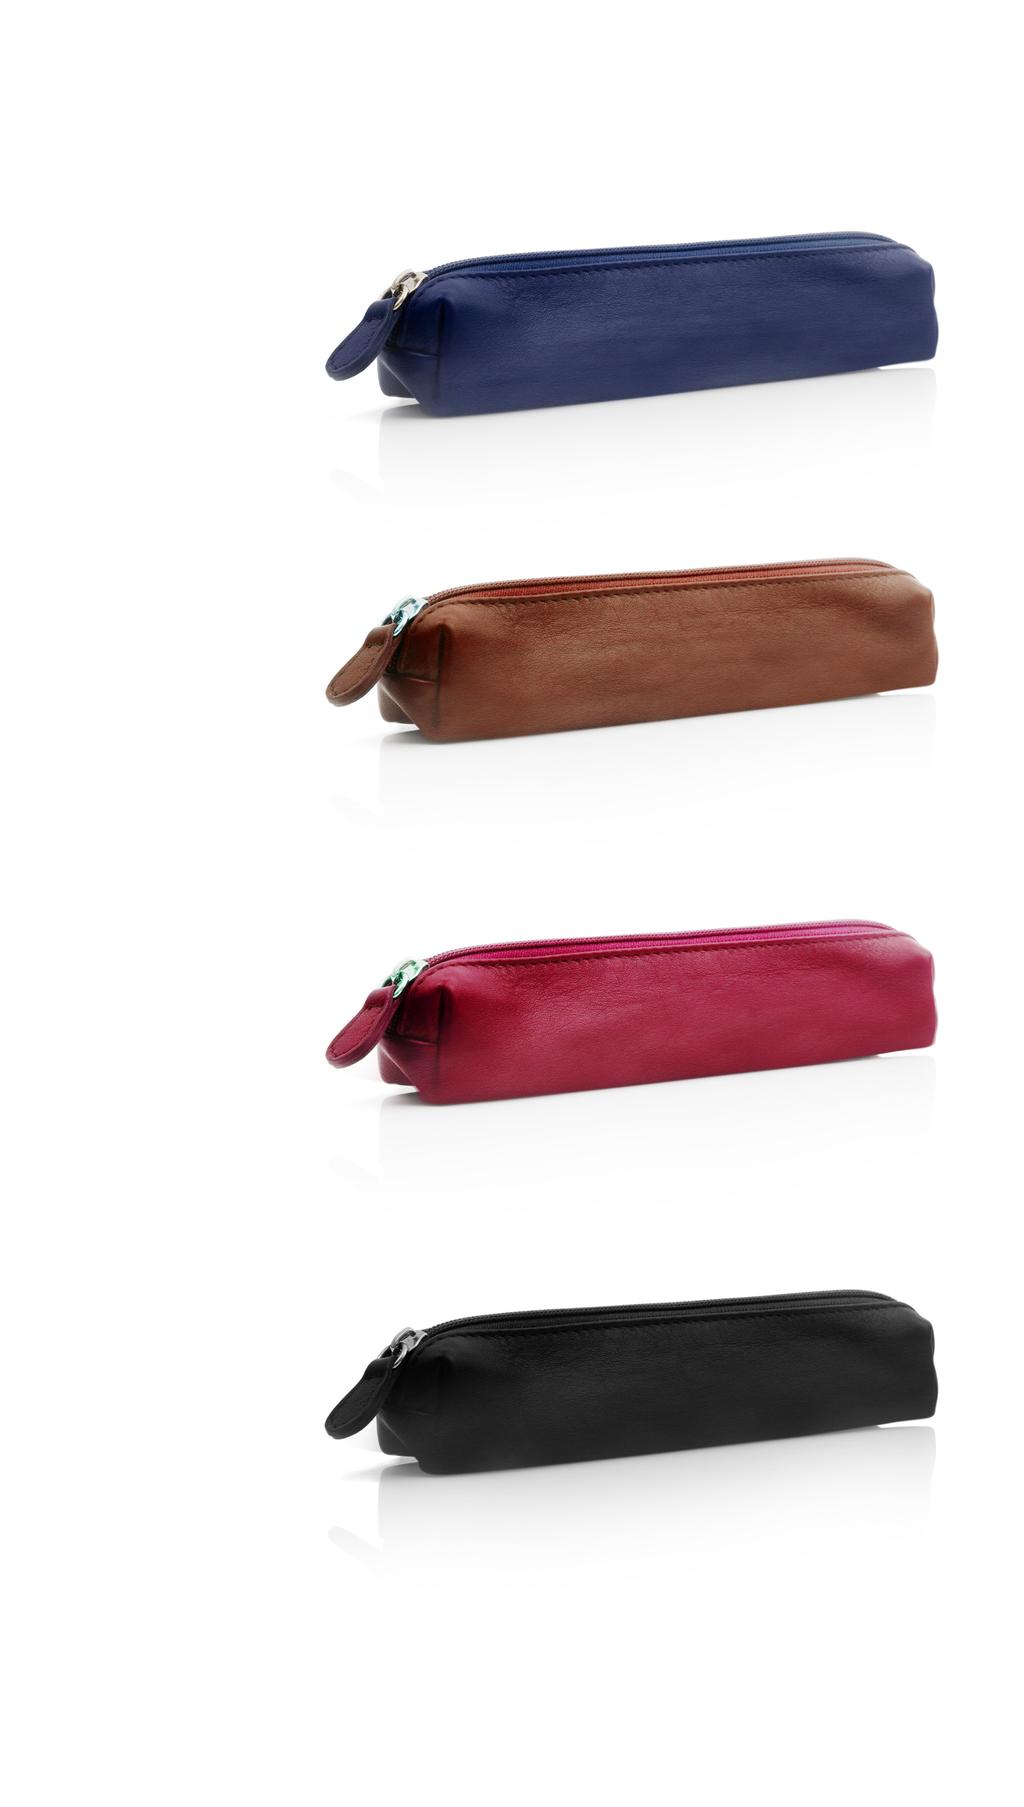 COBALT PENCIL CASE - Travel Medium size pencil case, hand finished from fine calf leather with plain reverse and strong zip which secures the case. Size: L 16 cm, H 4 cm, D 5 cm.